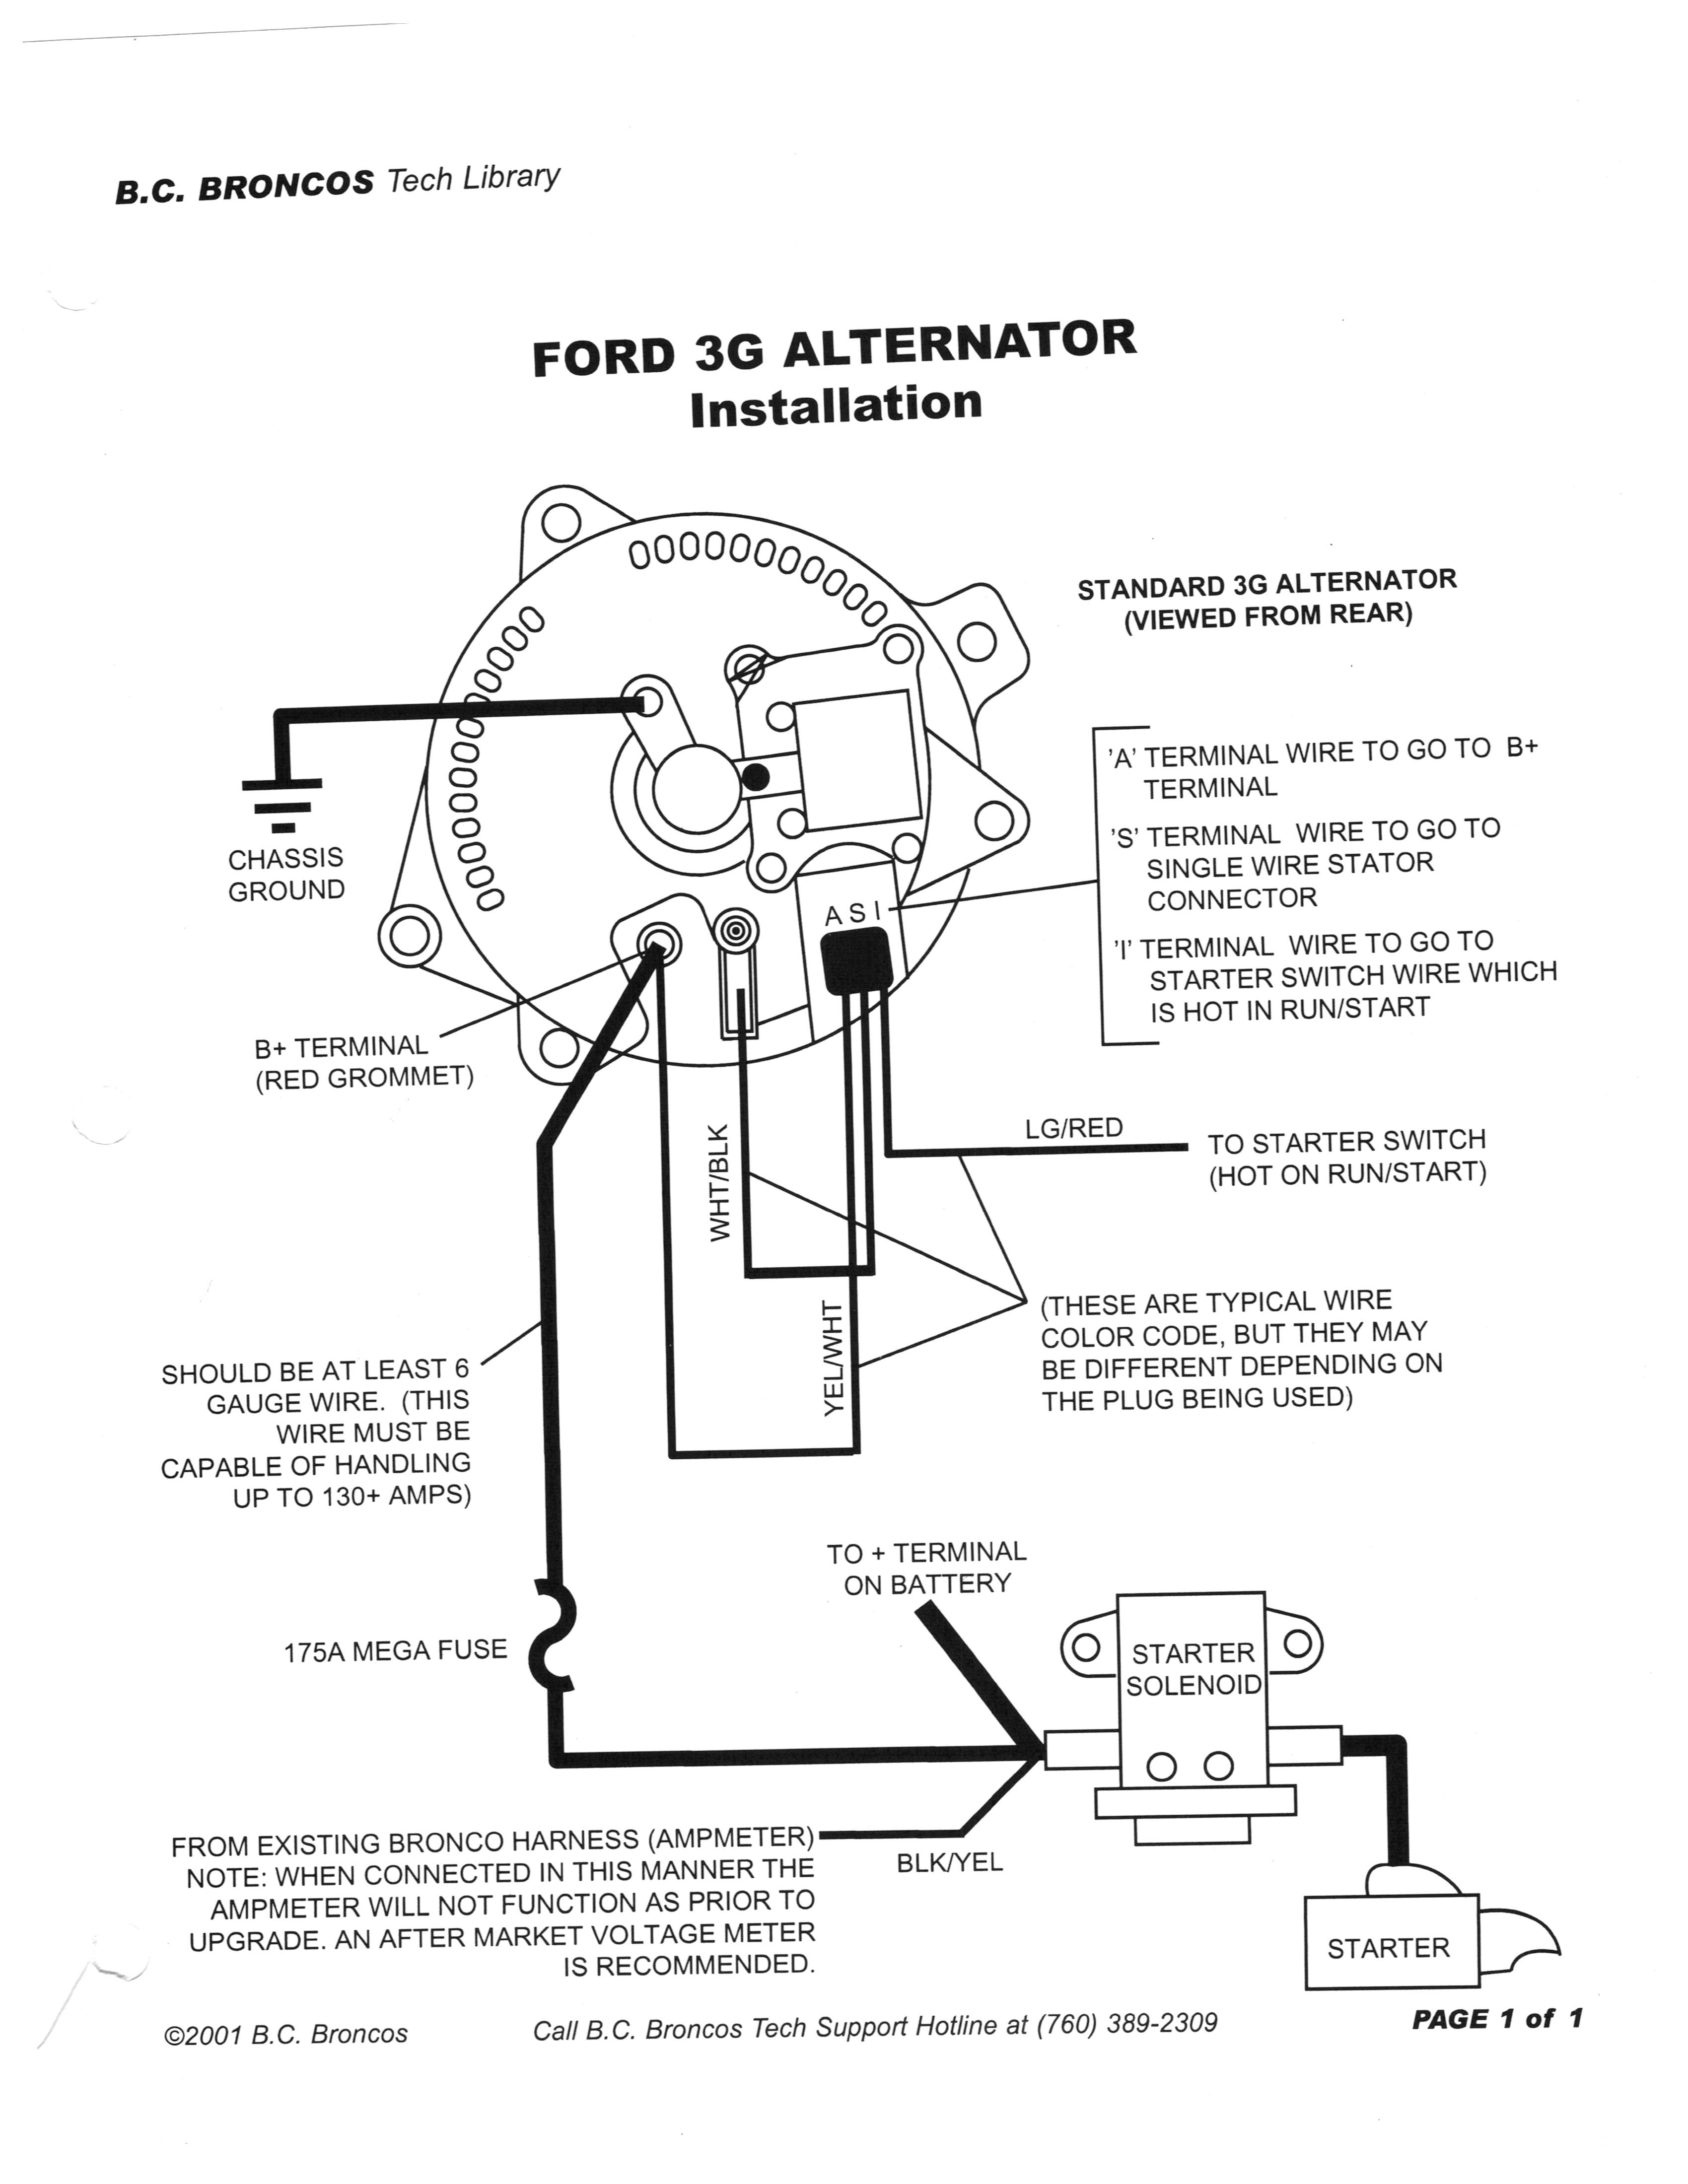 1991 ford F150 Single Terminal Starter Wireing Diagram] 7 3 ford Alternator Wire Diagram Full Version Hd Of 1991 ford F150 Single Terminal Starter Wireing